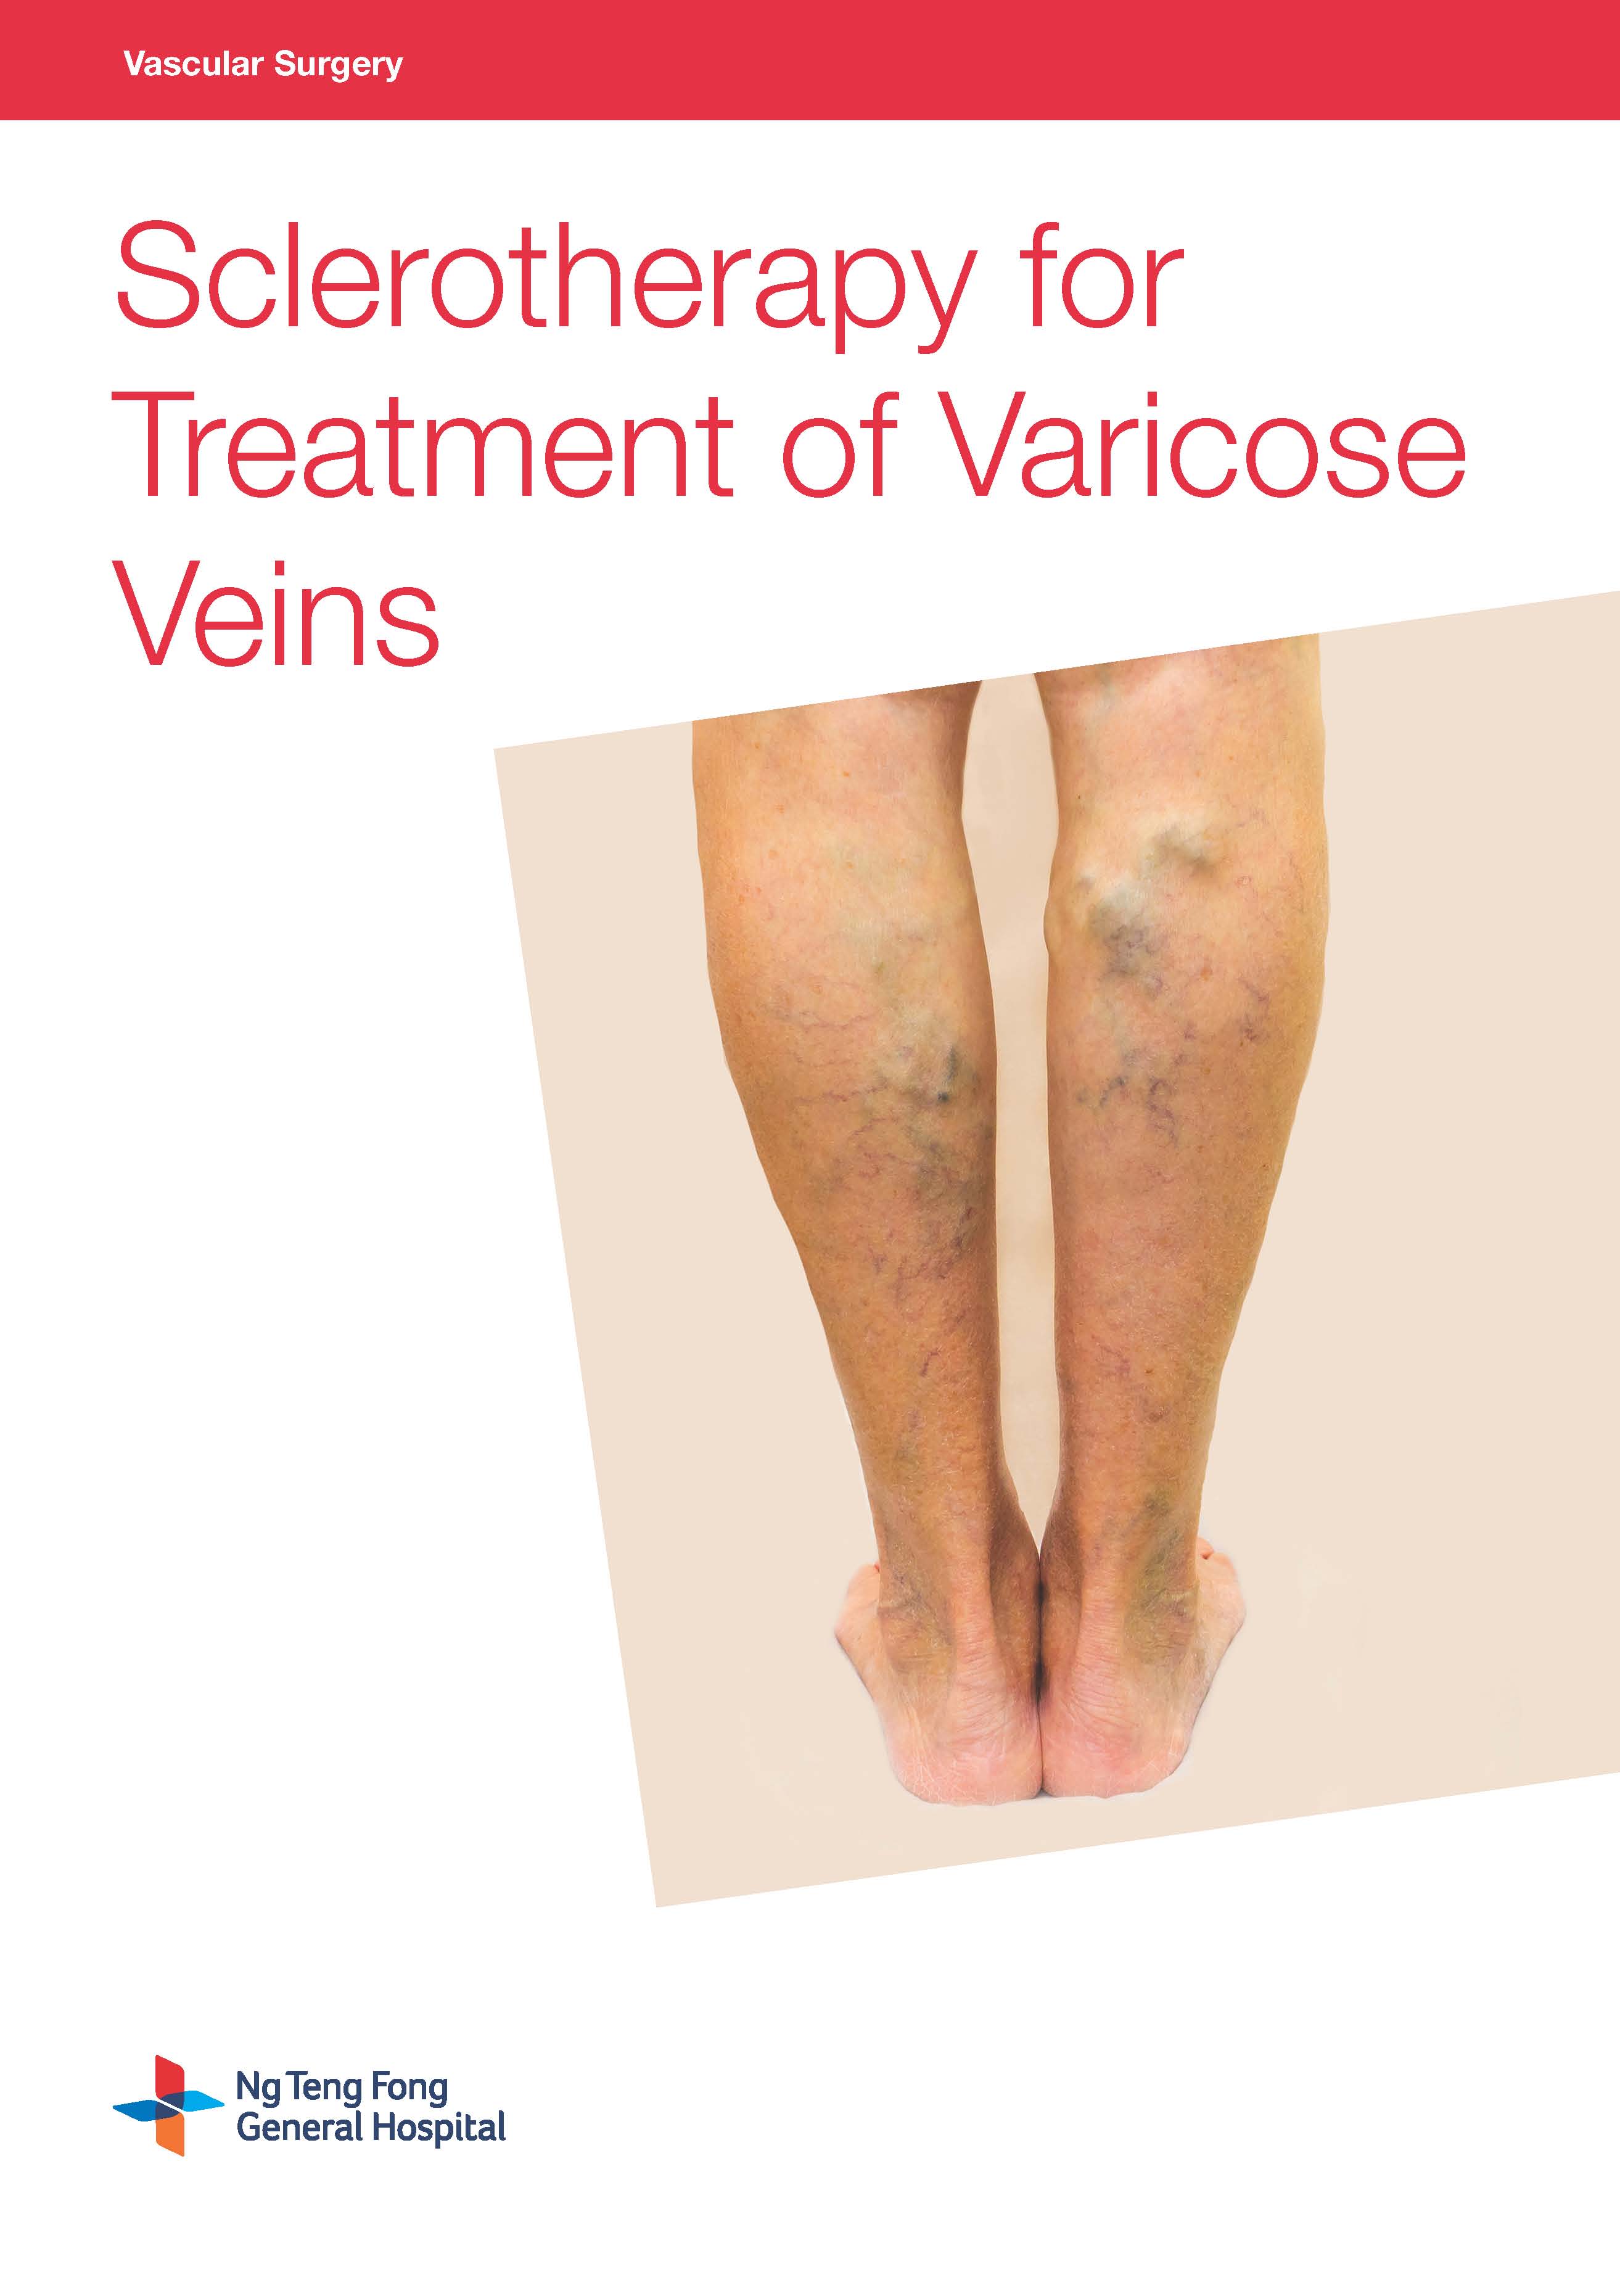 Sclerotherapy for Treatment of Varicose Veins